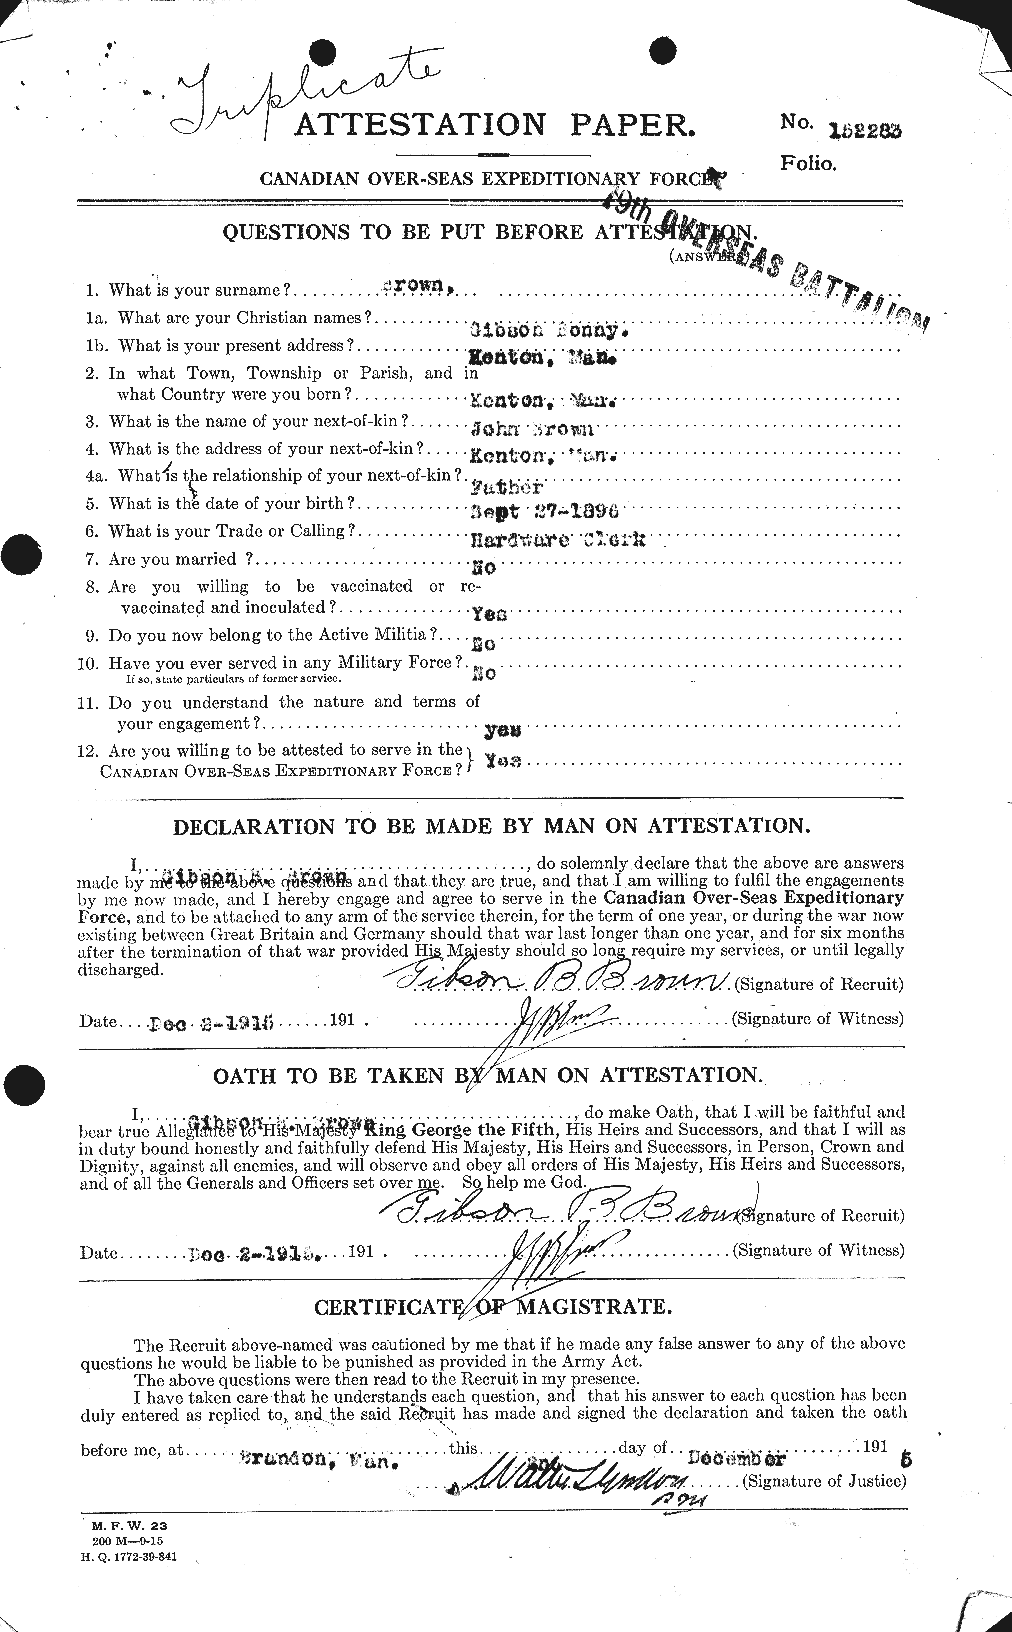 Personnel Records of the First World War - CEF 262609a